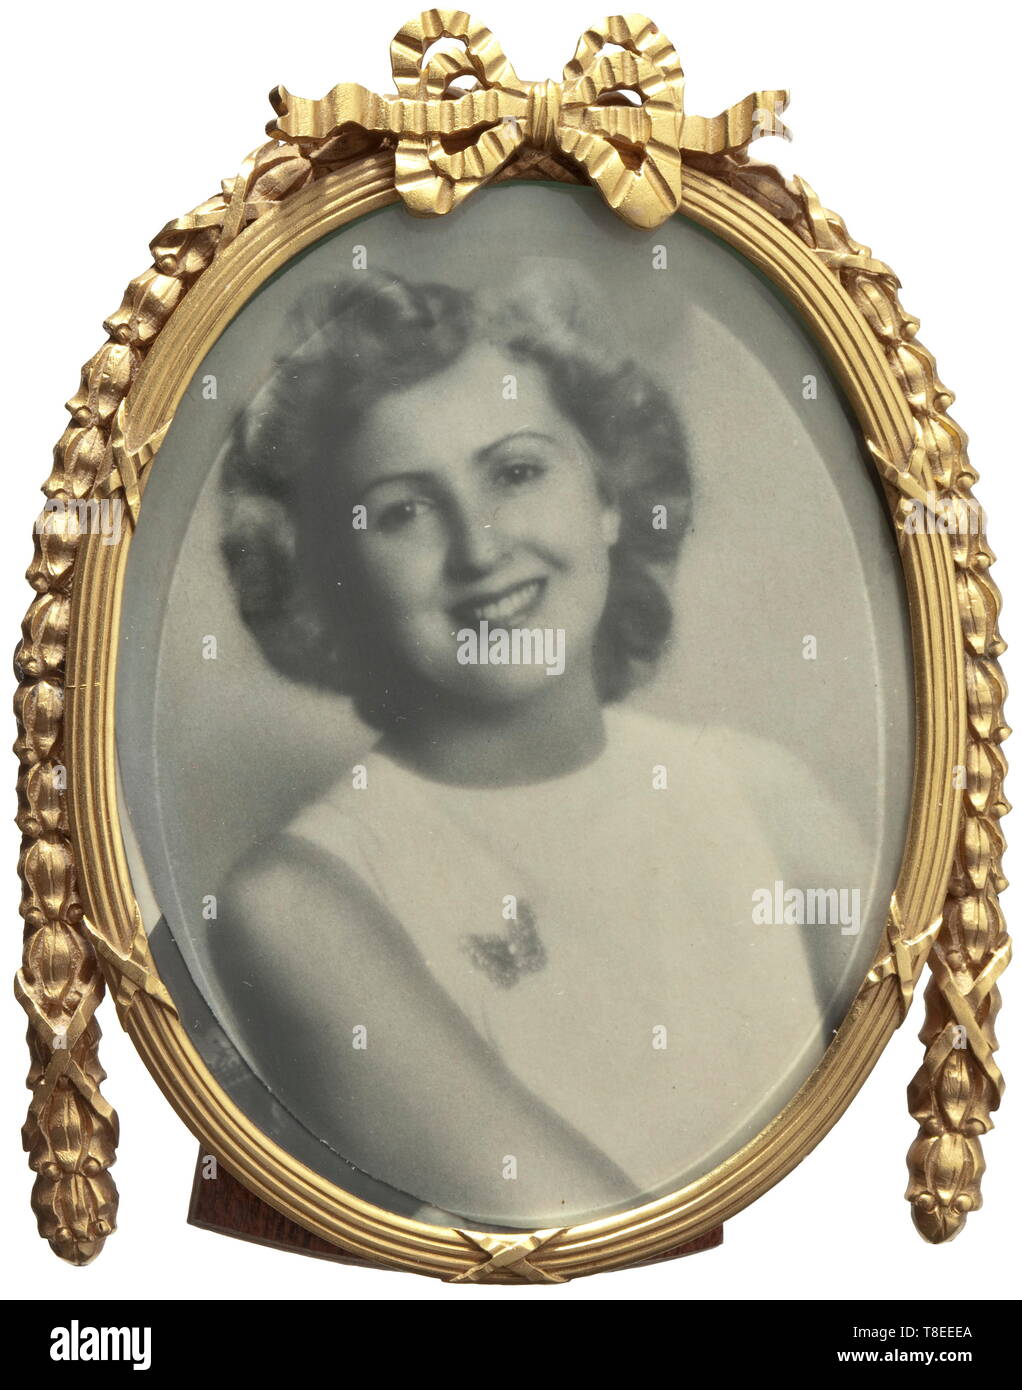 Eva Braun (1912 - 1945) - a portrait photo in a gold empire frame Portrait of young Eva Braun with butterfly brooch, the photo is a reproduction commissioned by Evas´s sister Ilse. The gold empire frame made by the Aachen jeweller Heinrich Steenaerts, hallmark '585', jeweller´s signature, height of frame 90 mm, 45.5 g. The back of the photo with handwritten note (tr) 'Hitler´s favourite photo of Eva. Reproduction developed after the war from an original negative. The frame comes from Hitler´s or Eva Braun´s possessions.' Heinrich Steenaerts, royal imperial court jeweller, g, Editorial-Use-Only Stock Photo